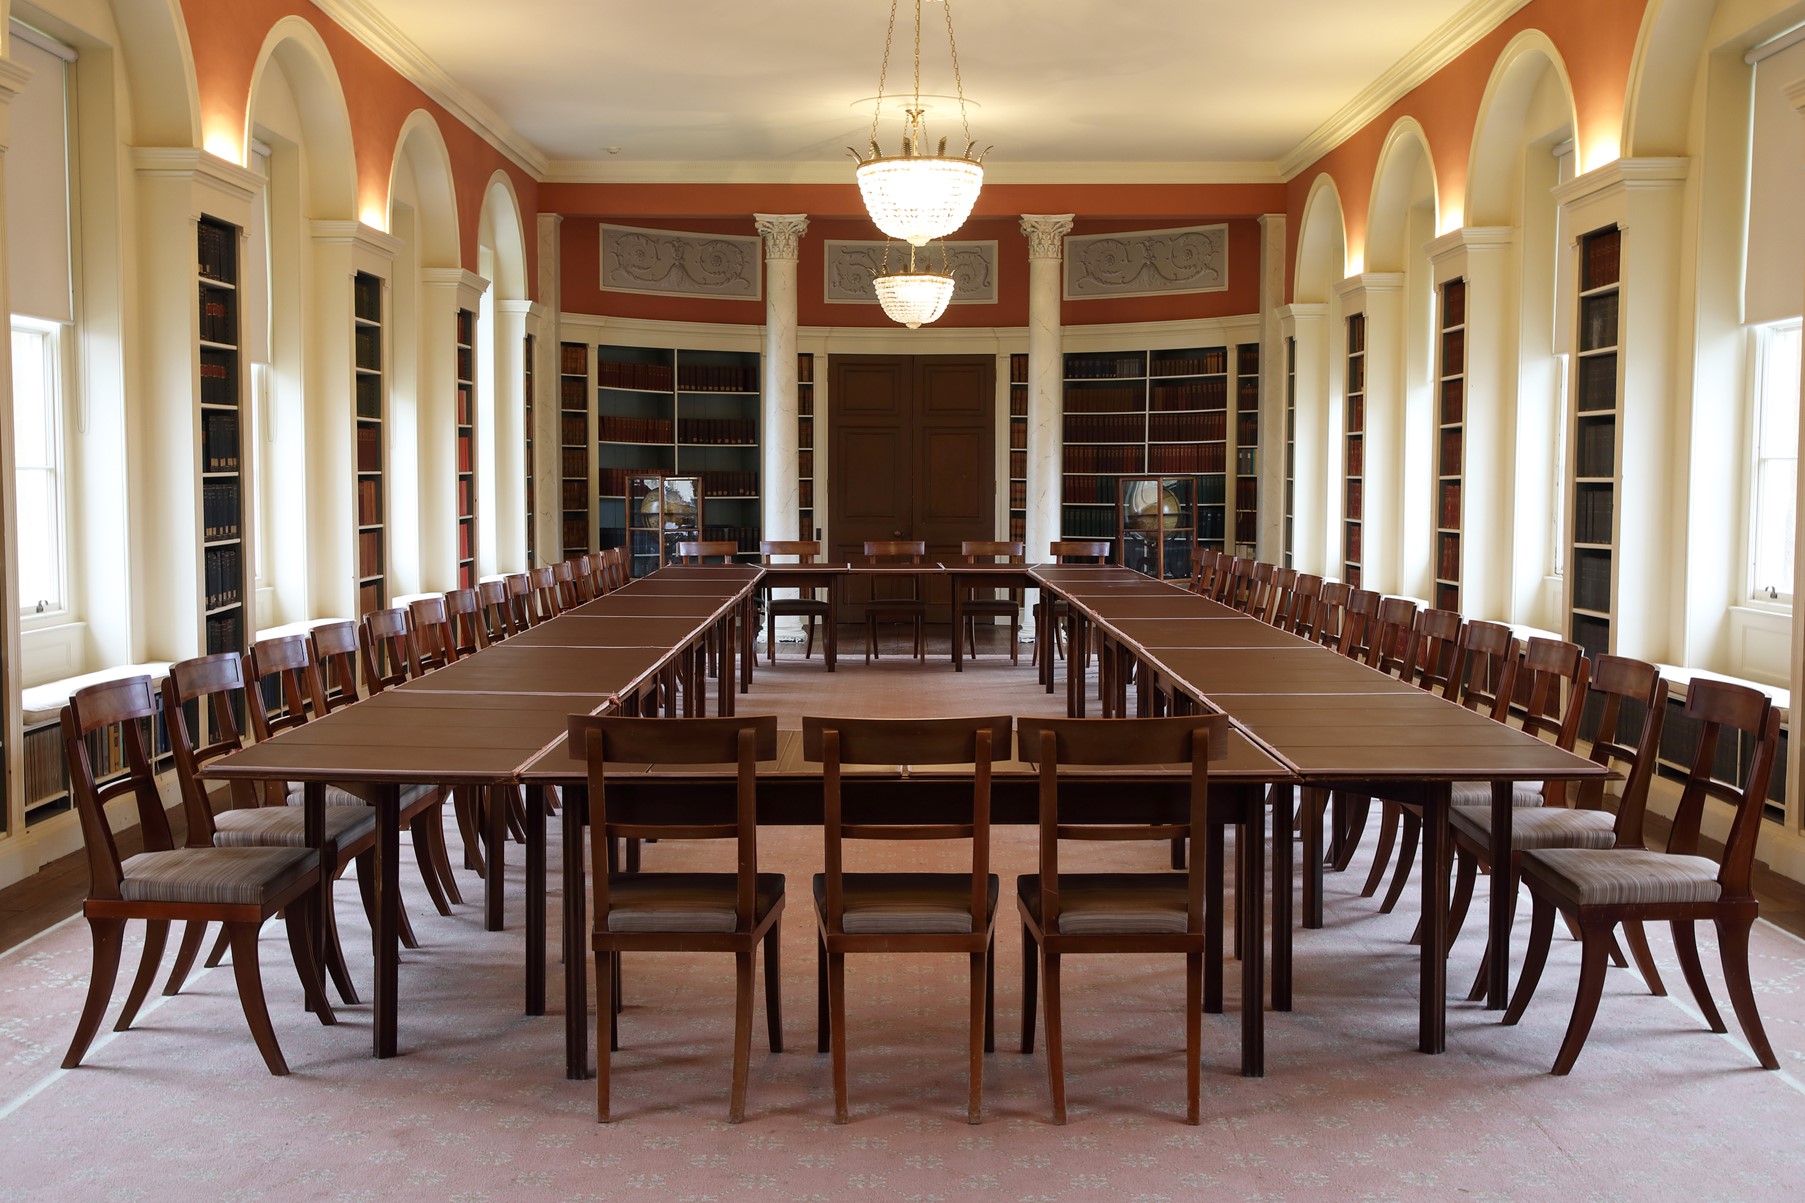 McGregor Matthews Room - a grand boardroom with a large brown meeting table. Books are placed in bookshelves either side.